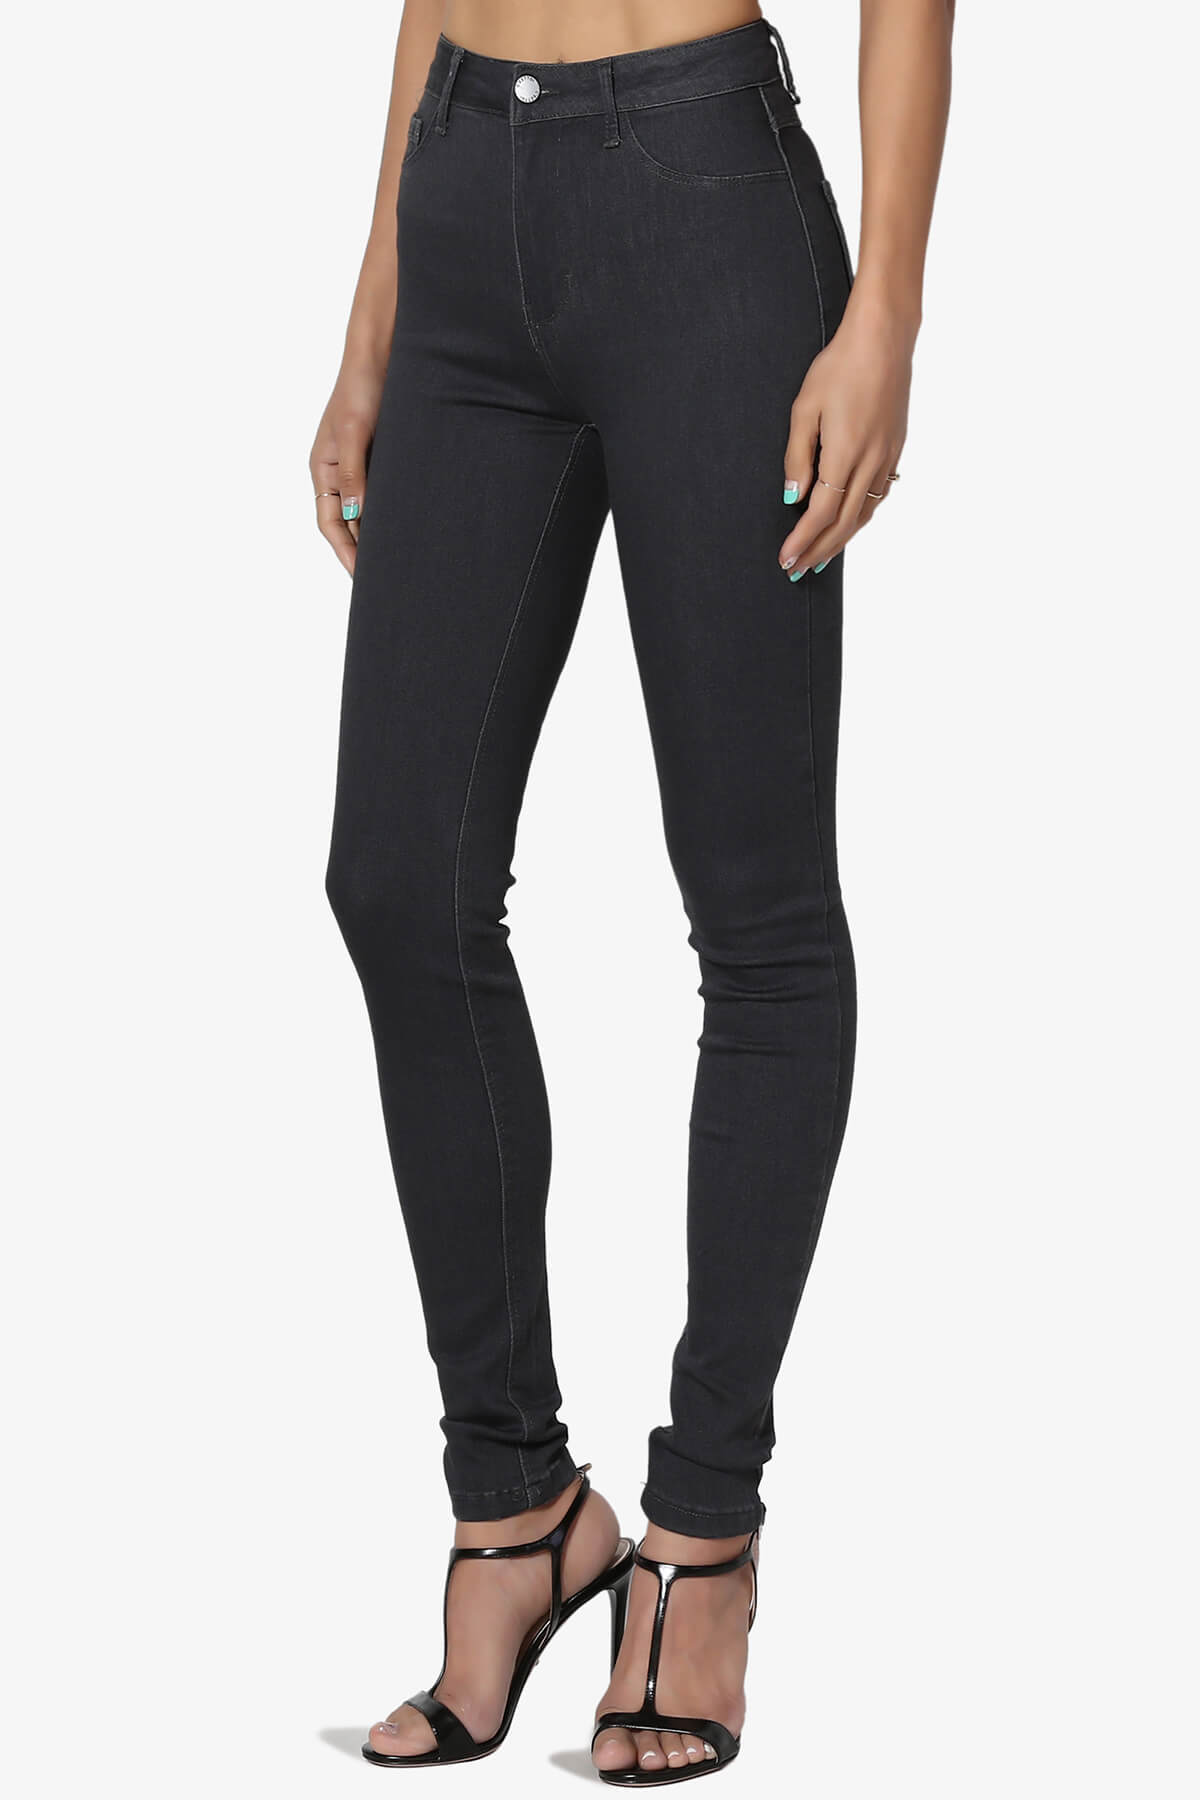 Women's Must-Have Colored High Rise Ankle Skinny Jeans Stretch Denim Jeggings - image 3 of 7